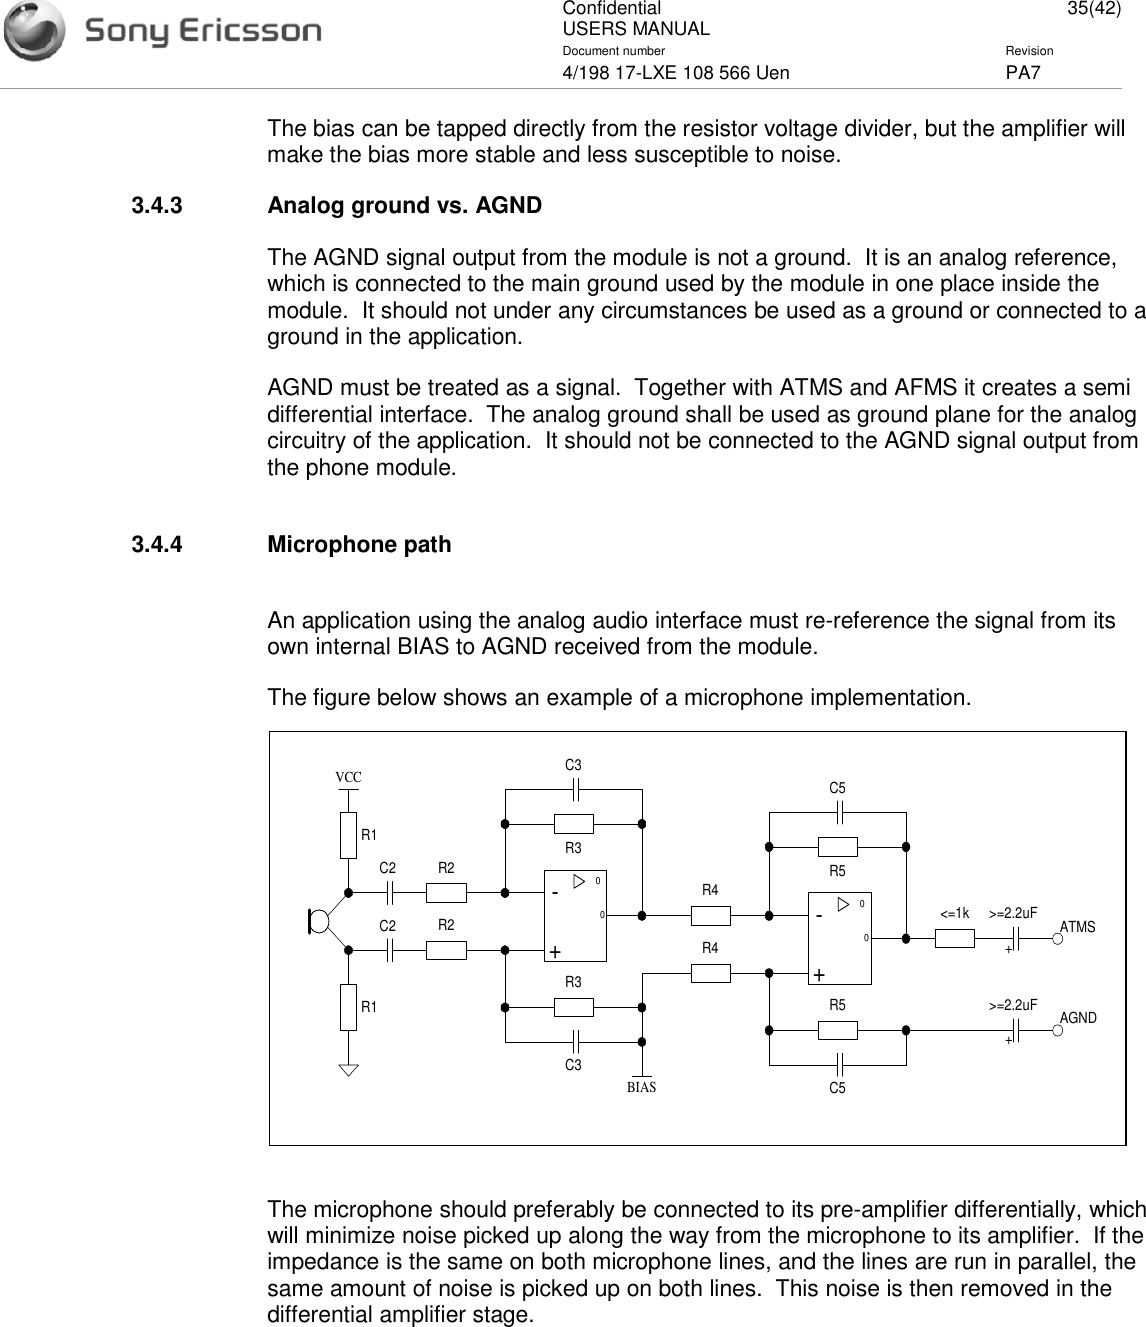 ConfidentialUSERS MANUAL 35(42)Document number Revision4/198 17-LXE 108 566 Uen PA7The bias can be tapped directly from the resistor voltage divider, but the amplifier willmake the bias more stable and less susceptible to noise.3.4.3 Analog ground vs. AGNDThe AGND signal output from the module is not a ground. It is an analog reference,which is connected to the main ground used by the module in one place inside themodule. It should not under any circumstances be used as a ground or connected to aground in the application.AGND must be treated as a signal. Together with ATMS and AFMS it creates a semidifferential interface. The analog ground shall be used as ground plane for the analogcircuitry of the application. It should not be connected to the AGND signal output fromthe phone module.3.4.4 Microphone pathAn application using the analog audio interface must re-reference the signal from itsown internal BIAS to AGND received from the module.The figure below shows an example of a microphone implementation.The microphone should preferably be connected to its pre-amplifier differentially, whichwill minimize noise picked up along the way from the microphone to its amplifier. If theimpedance is the same on both microphone lines, and the lines are run in parallel, thesame amount of noise is picked up on both lines. This noise is then removed in thedifferential amplifier stage.0-+0R2R2R3R3R1R1VCCC2C2C3C30-+0R4R4R5R5C5C5&lt;=1kBIAS&gt;=2.2uF ATMSAGND&gt;=2.2uF++